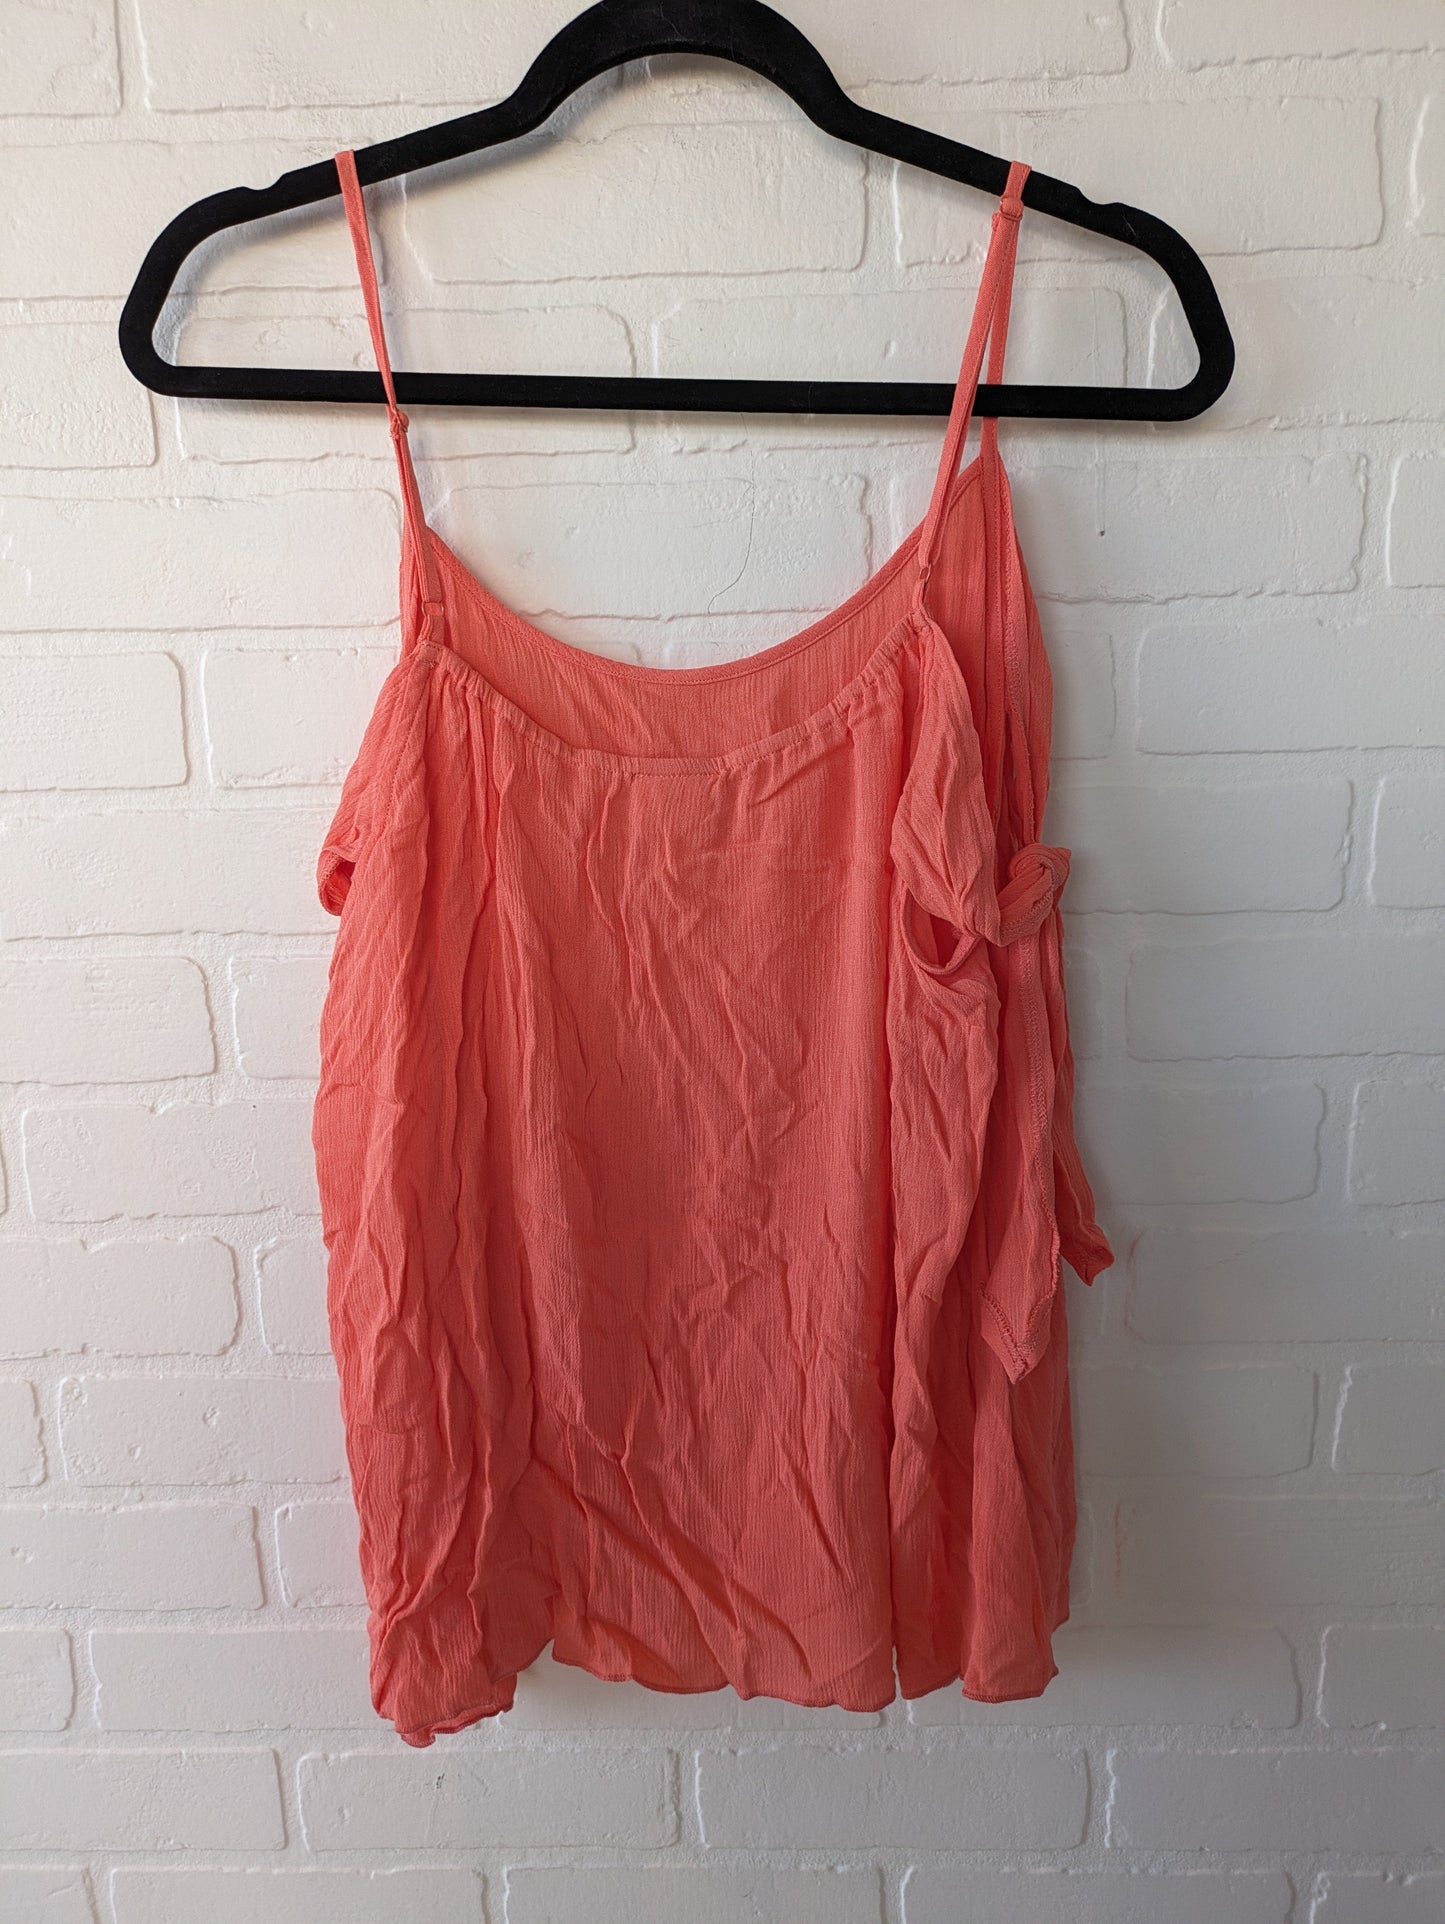 Blouse Sleeveless By Mossimo  Size: 1x